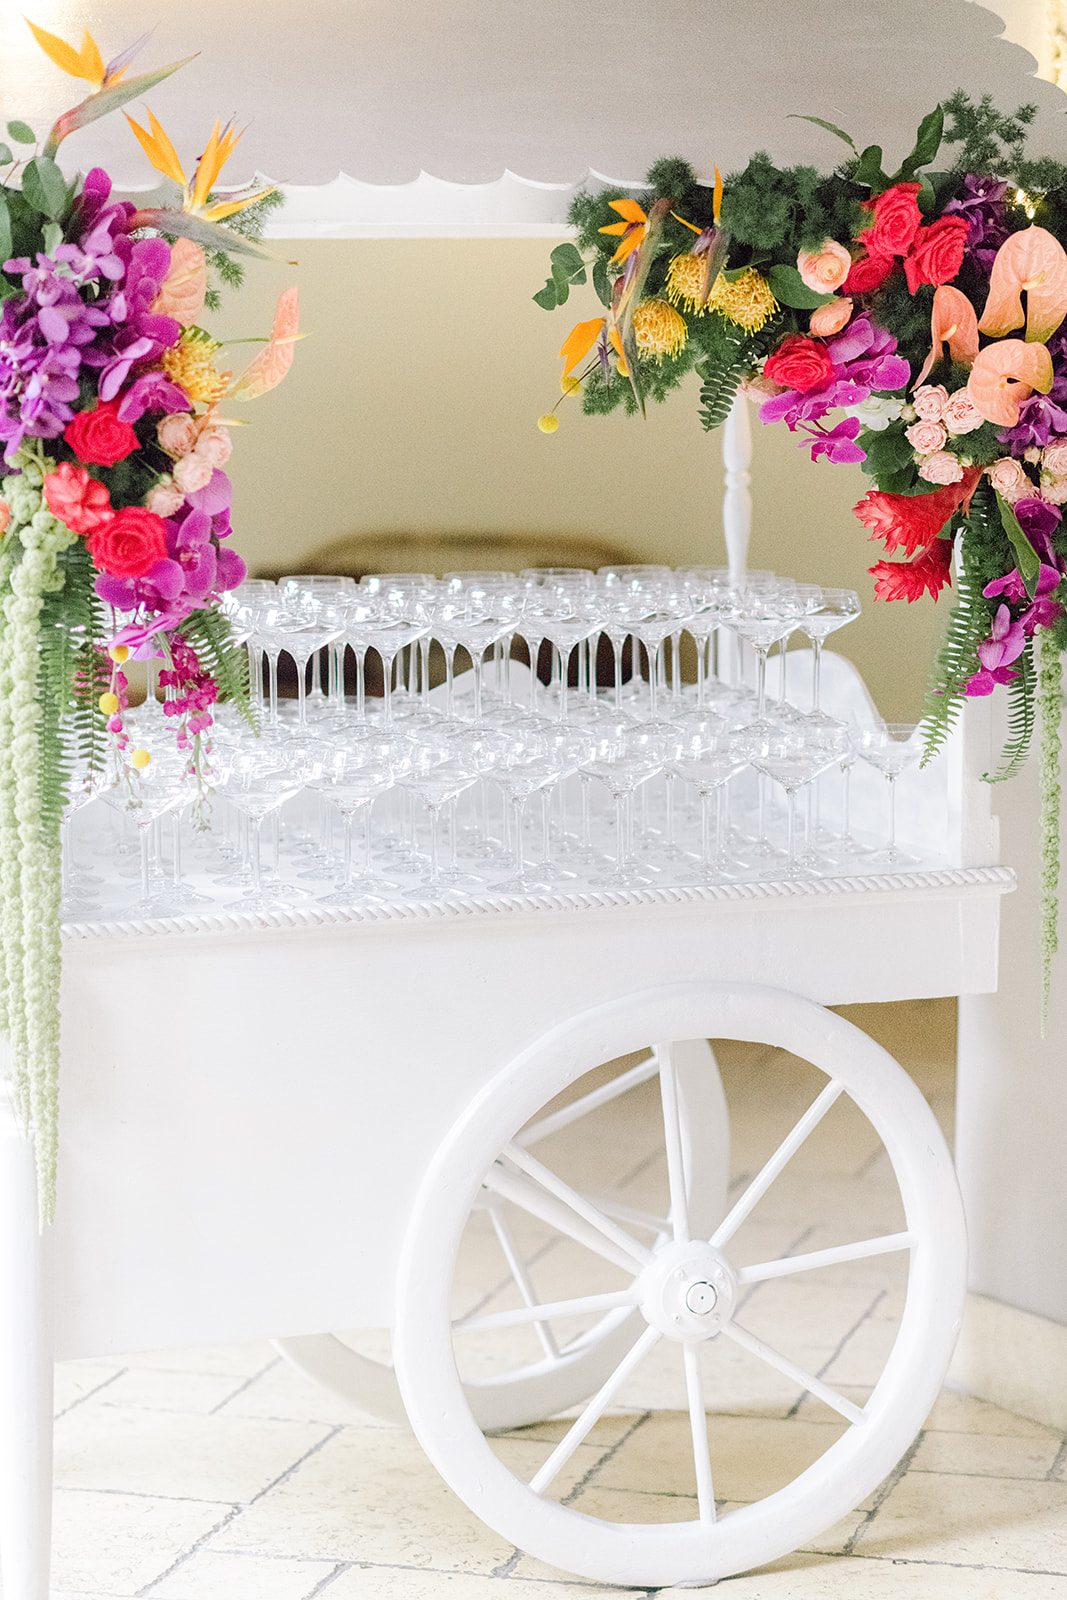 Champagne cart covered in flowers at cocktail hour at Mayfair House Hotel & Garden in Miami on wedding day.